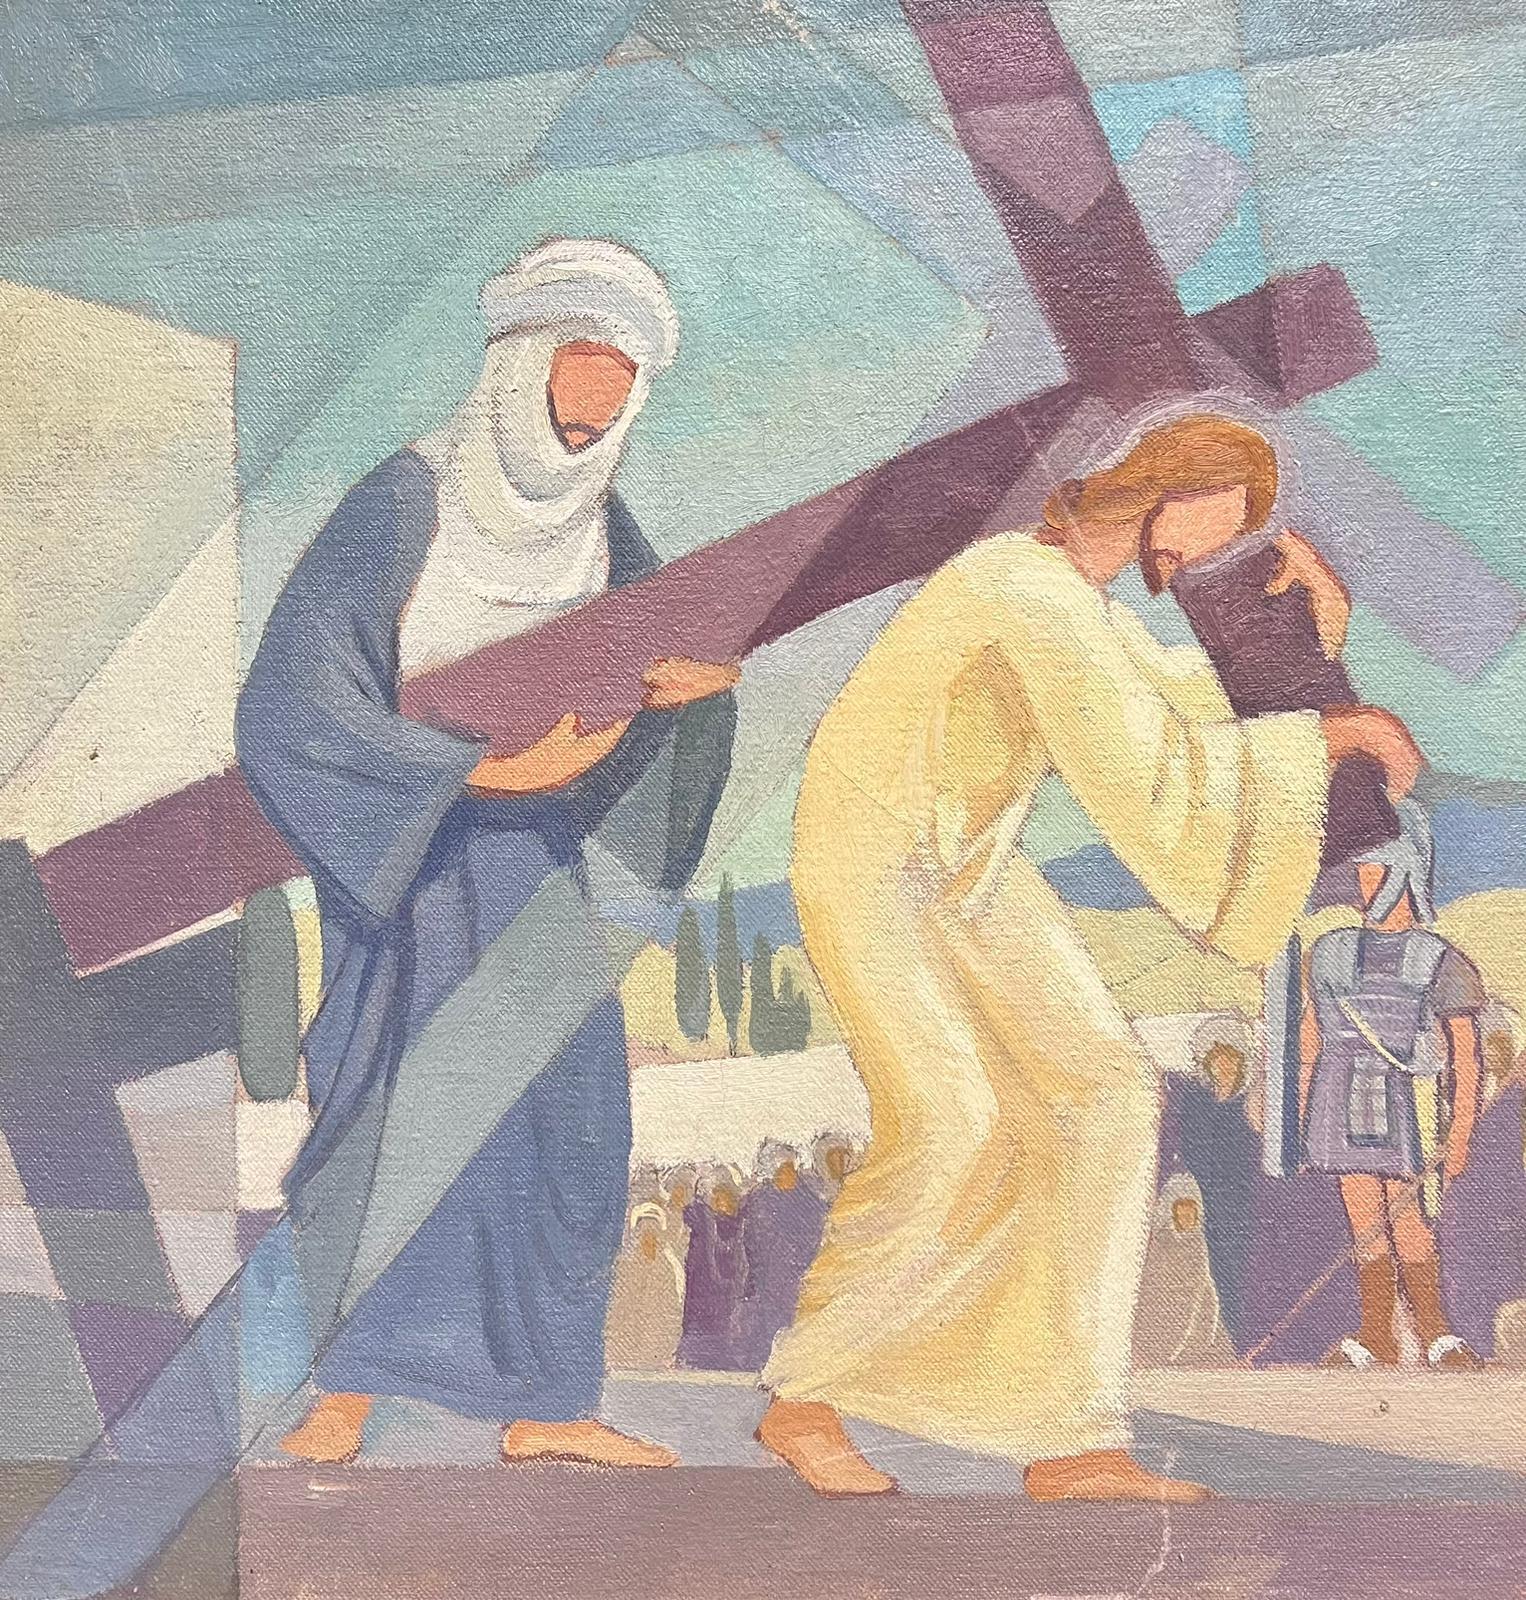 Jean Laforgue Landscape Painting - 1950's French Cubist/ Modernist Oil Painting One of the Stations of the Cross 